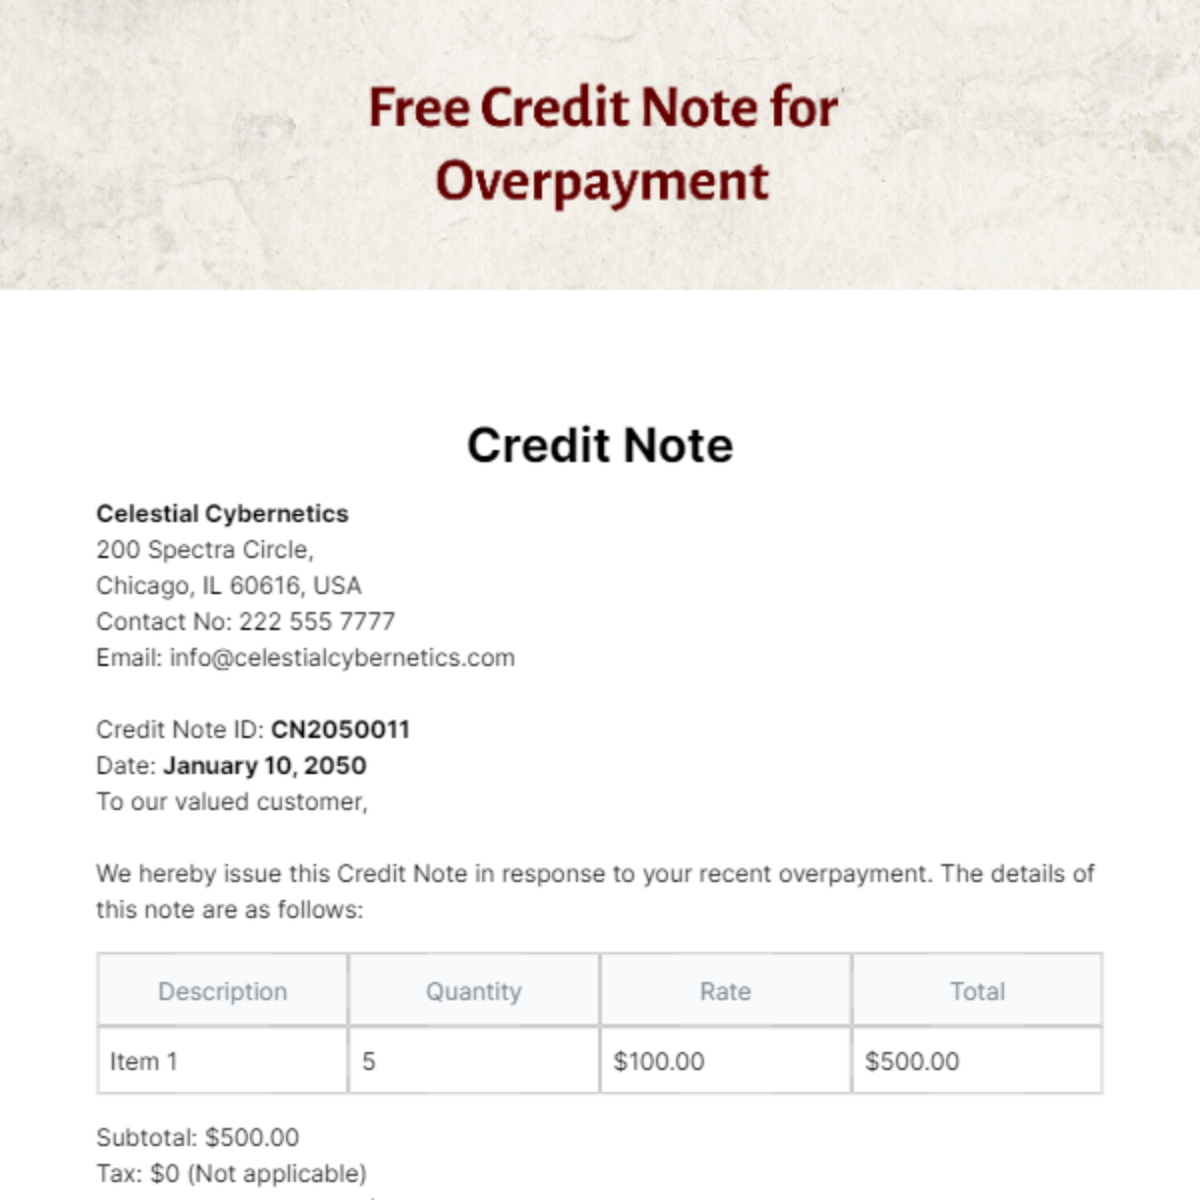 Credit Note for Overpayment Template